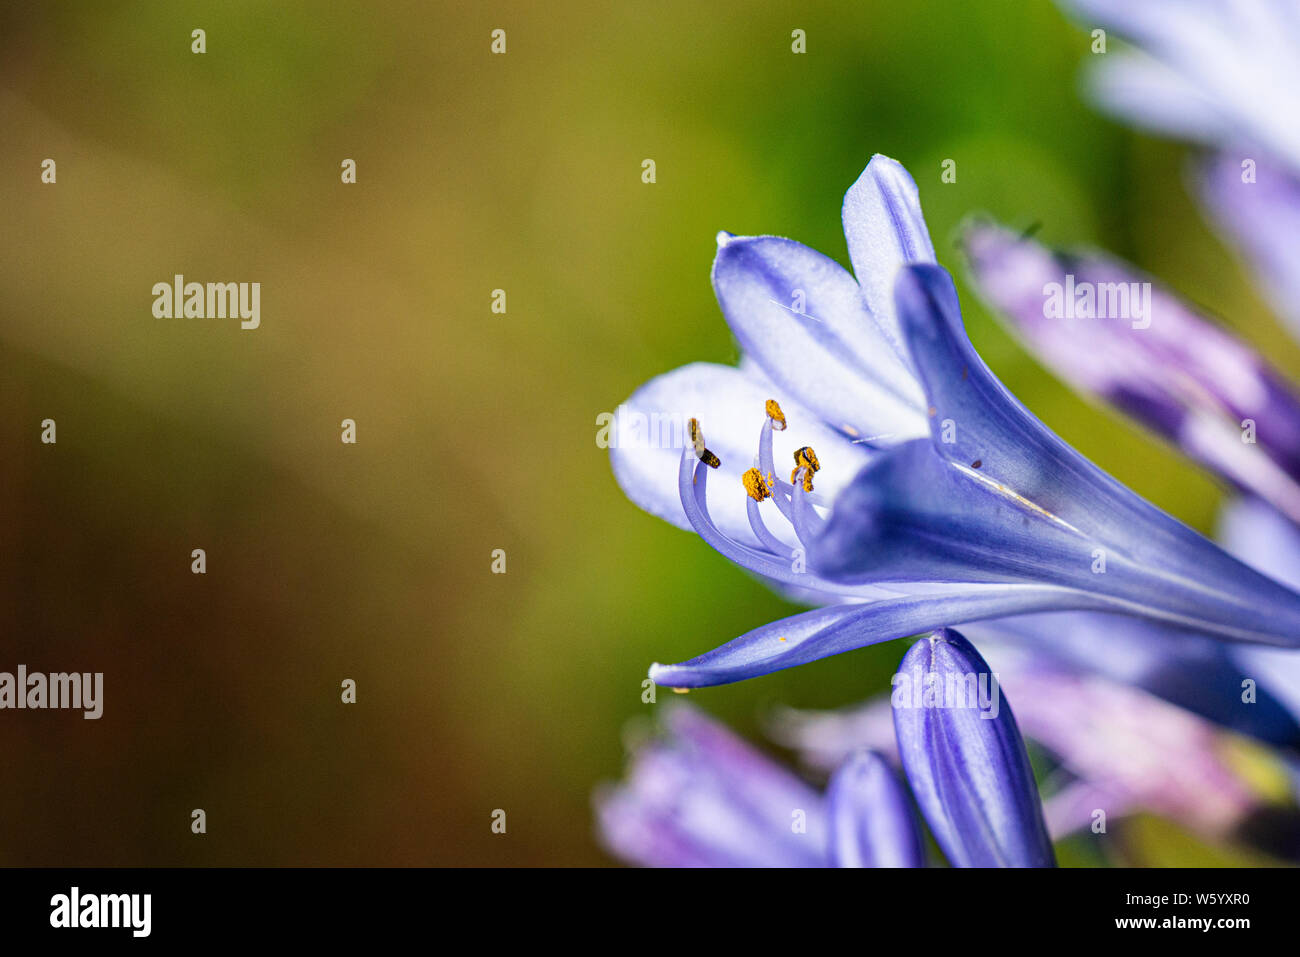 A close up of a flower of an African Lily (Agapanthus) Stock Photo